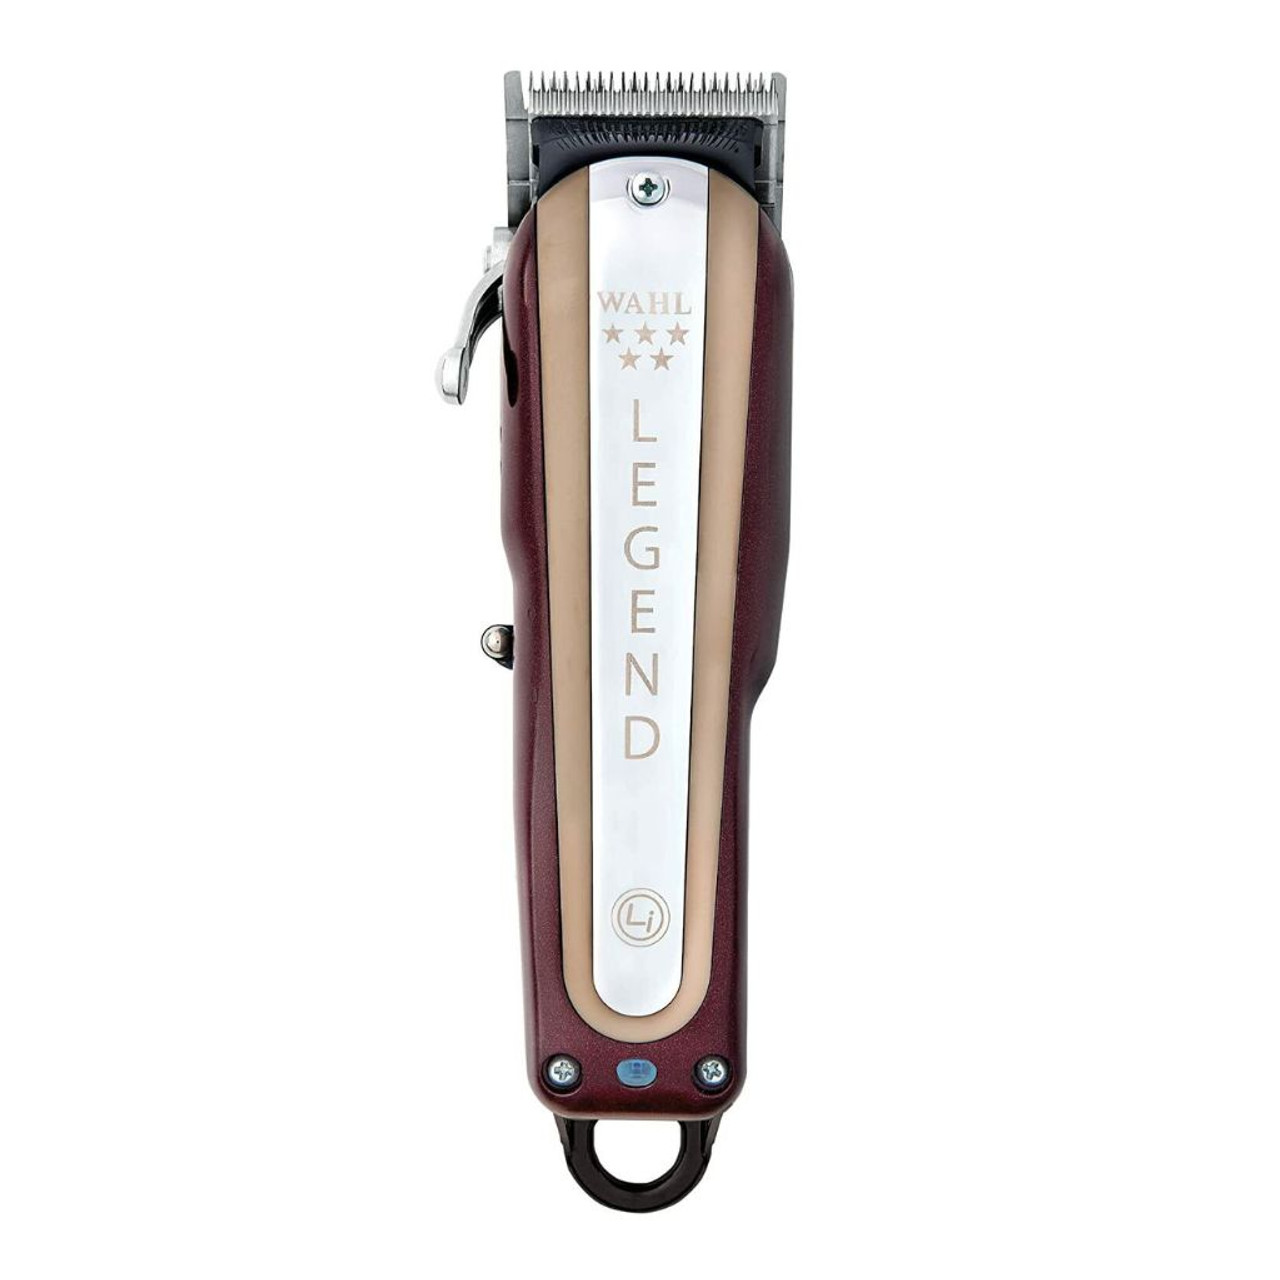 Wahl® Professional 5-Star Cordless Legend Clippers, #08594 product image